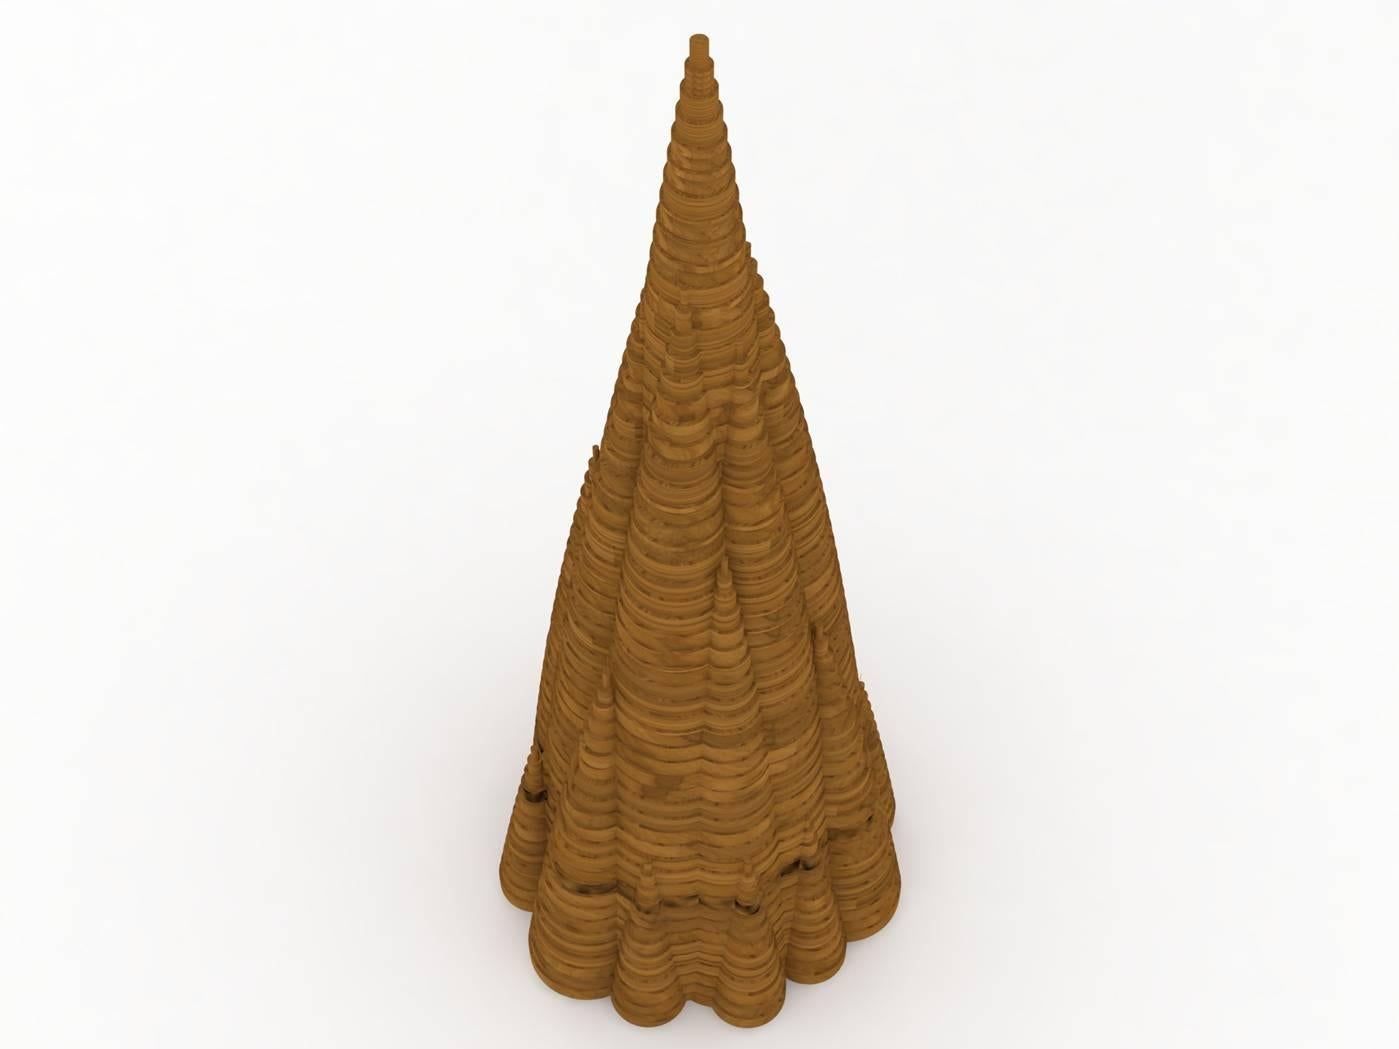 The imaginary towers are small sculptures in birch wood, by Michele De Lucchi.

Technology: CNC milling cutter
Material: wood
Size: 400 x 400 x 650
Code: AWIT1.